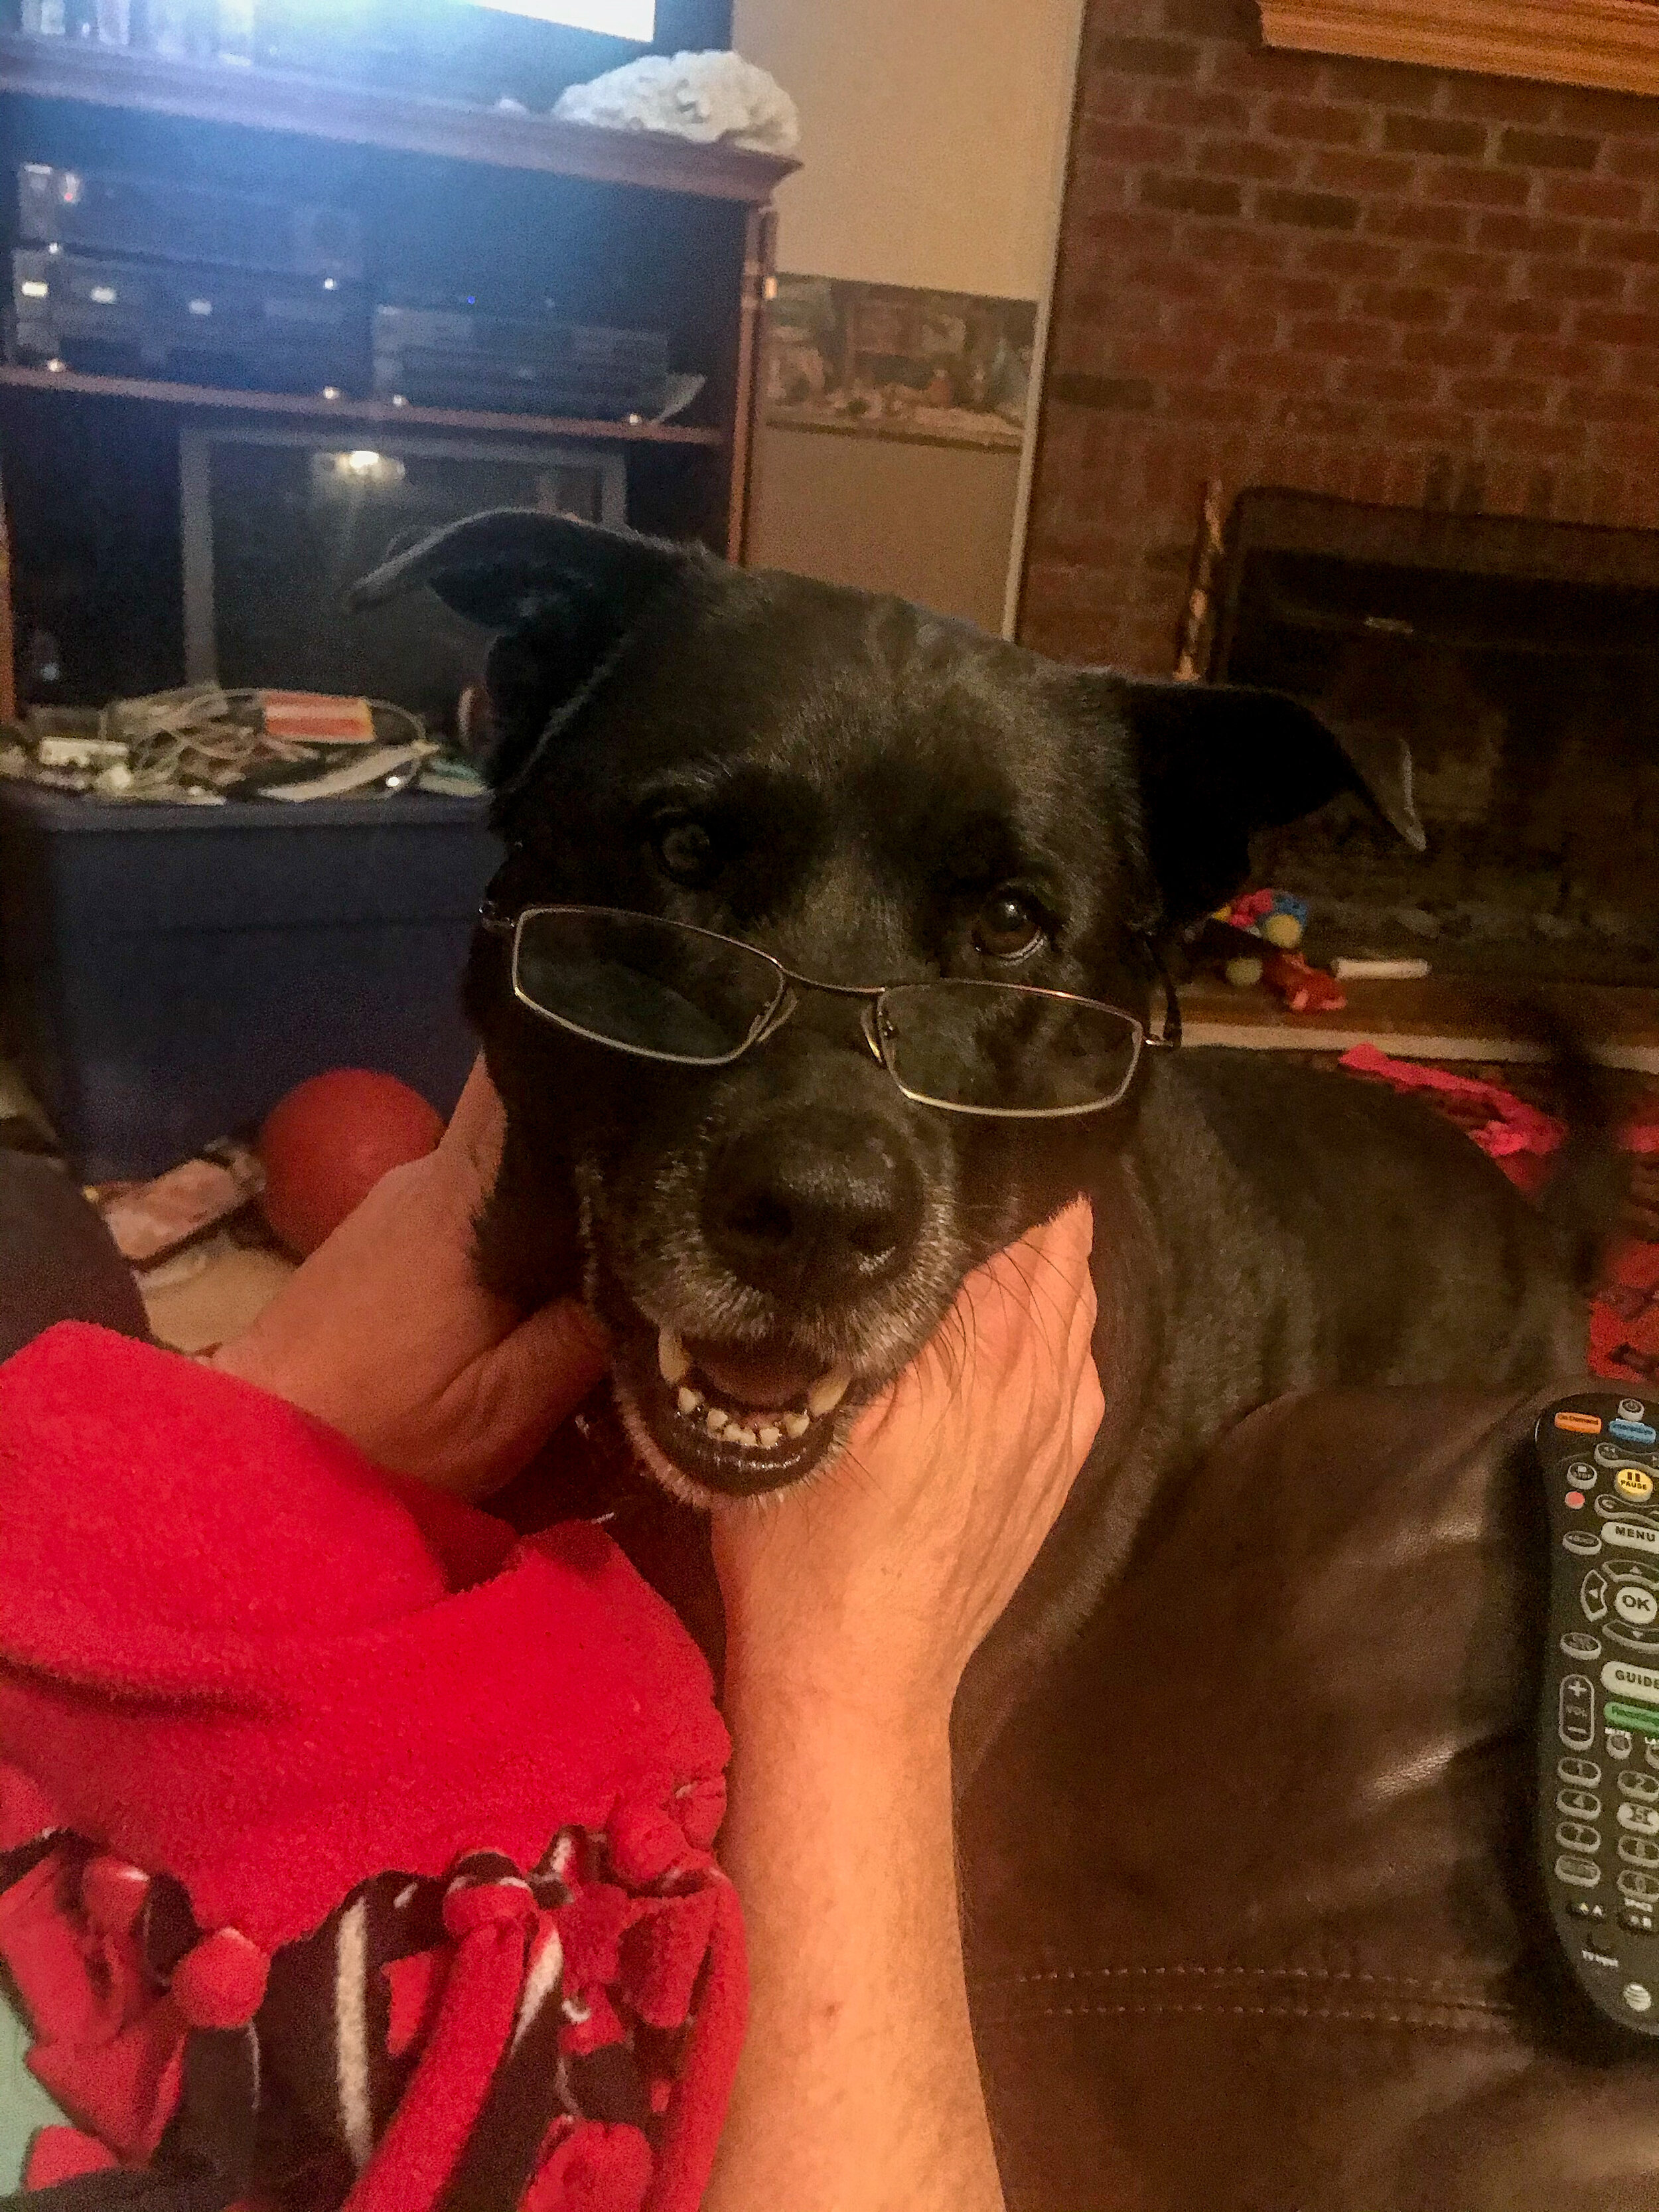 Cooper has the nickname Dr. Dog. The family puts glasses on him as a joke; he is definitely a large part of the family.